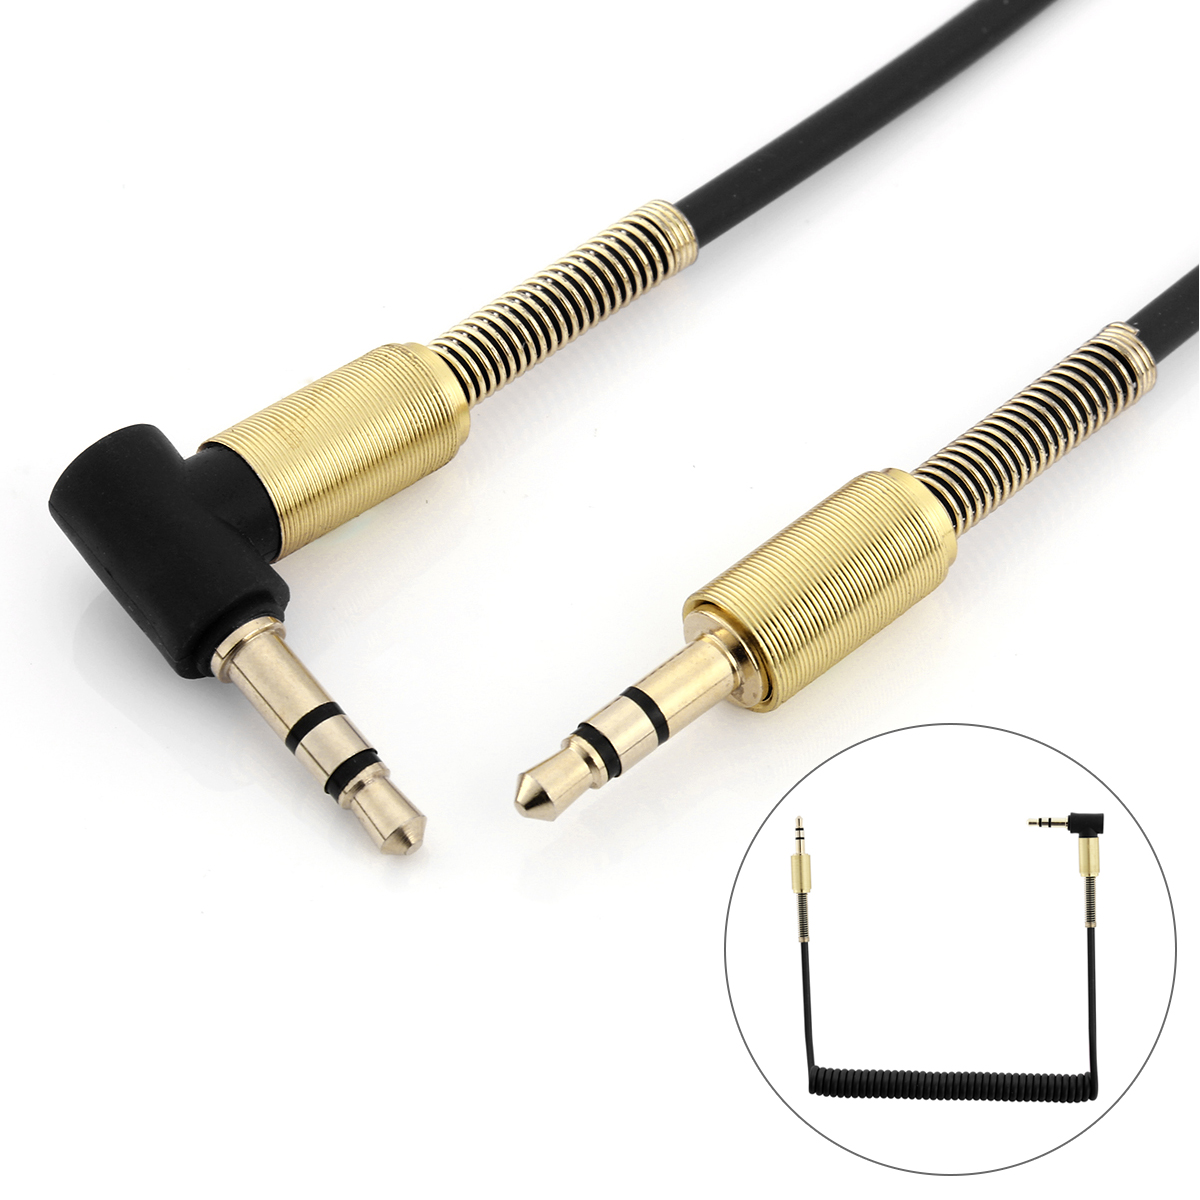 3.5mm Spiral Spring Relief Right Angle 90 Degree AUX Stereo Audio Cable - Black